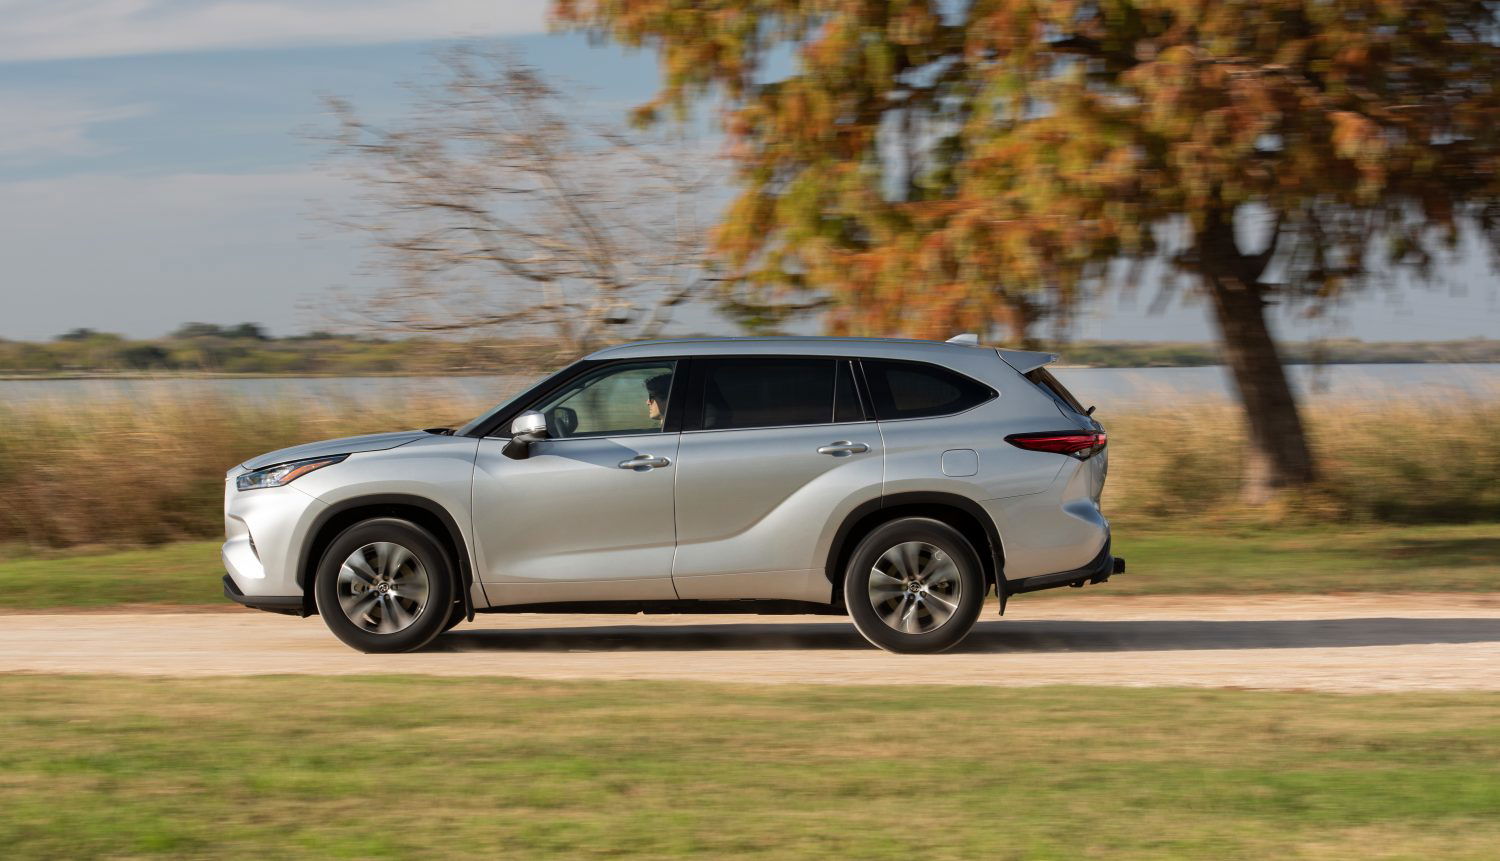 Best Features of the 2022 Toyota Highlander Via Toyota.